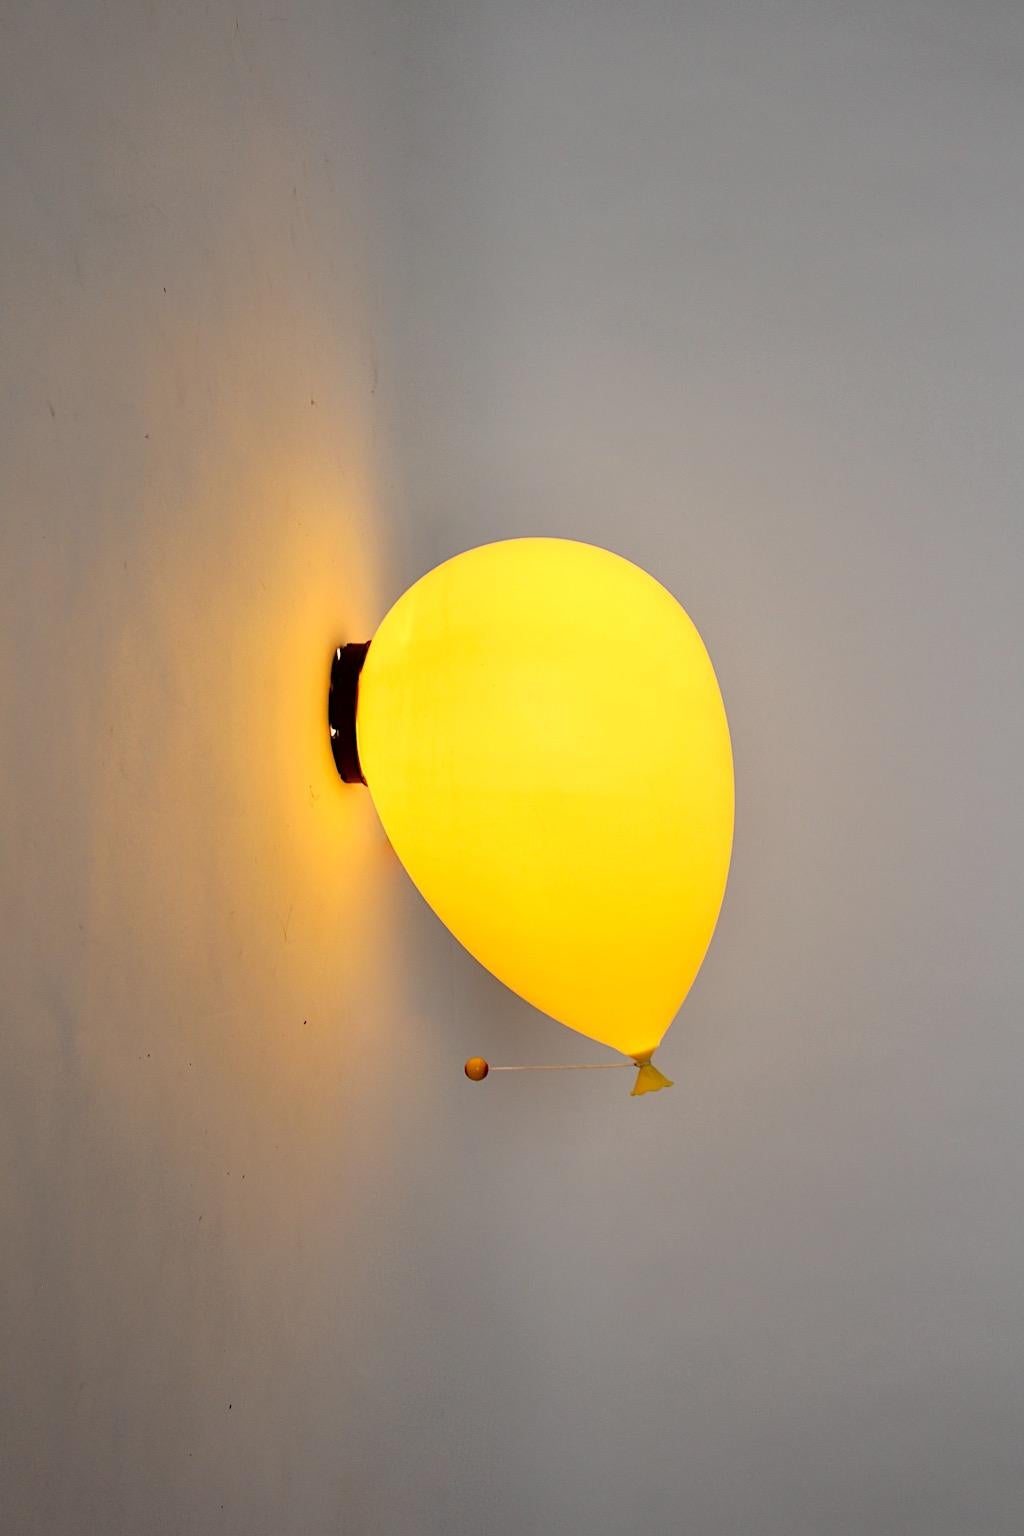 Modern vintage flush mount or sconce ballon like in yellow color by Yves Christin for Bilumen 1980s Italy.
Bold modern design lighting by Yves Christin from the 1980s ballon like in yellow color with one E 27 socket.
Could add a touch of whimsical